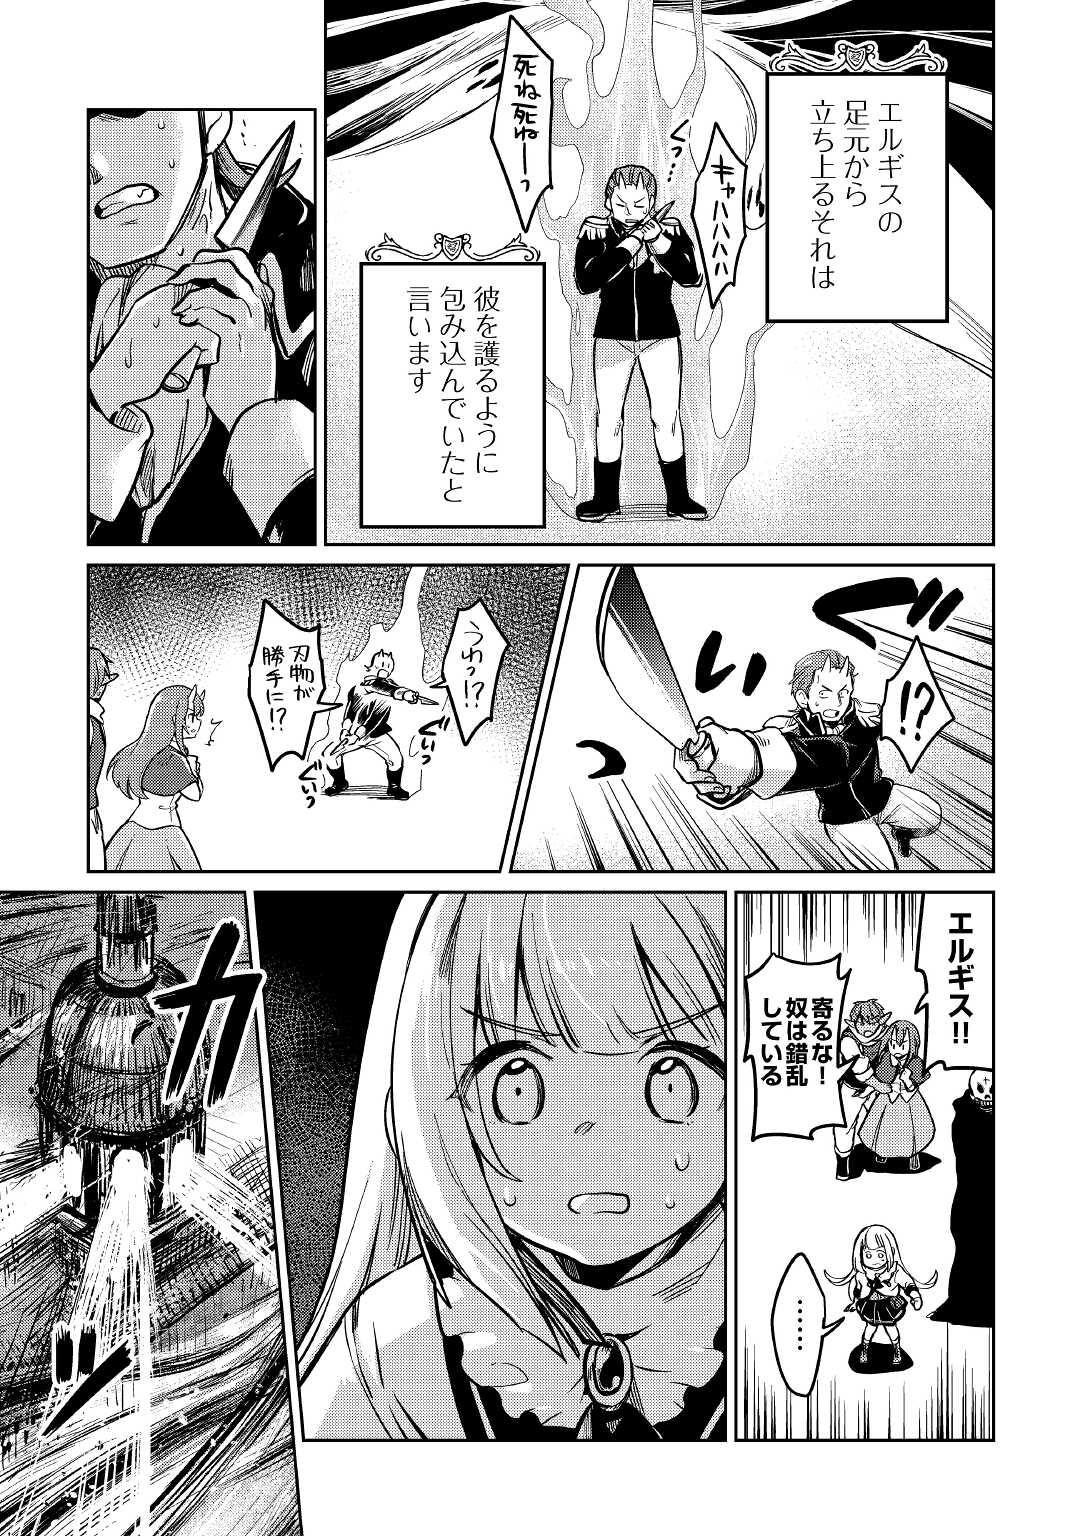 The Former Structural Researcher’s Story of Otherworldly Adventure 第40話 - Page 5